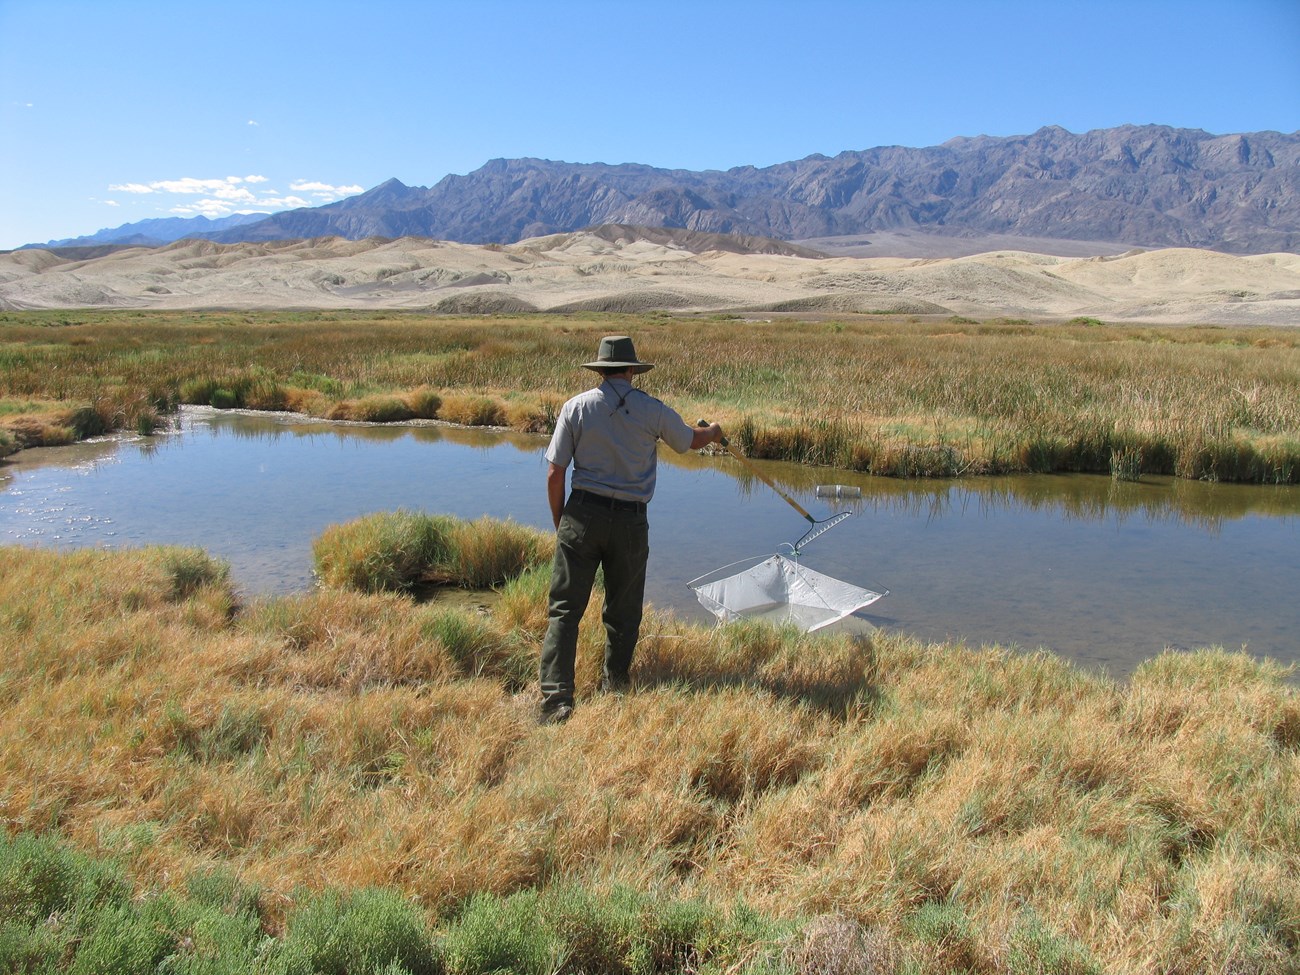 An NPS researcher uses a net in a desert creek surrounded by reeds with mountains in the distance.